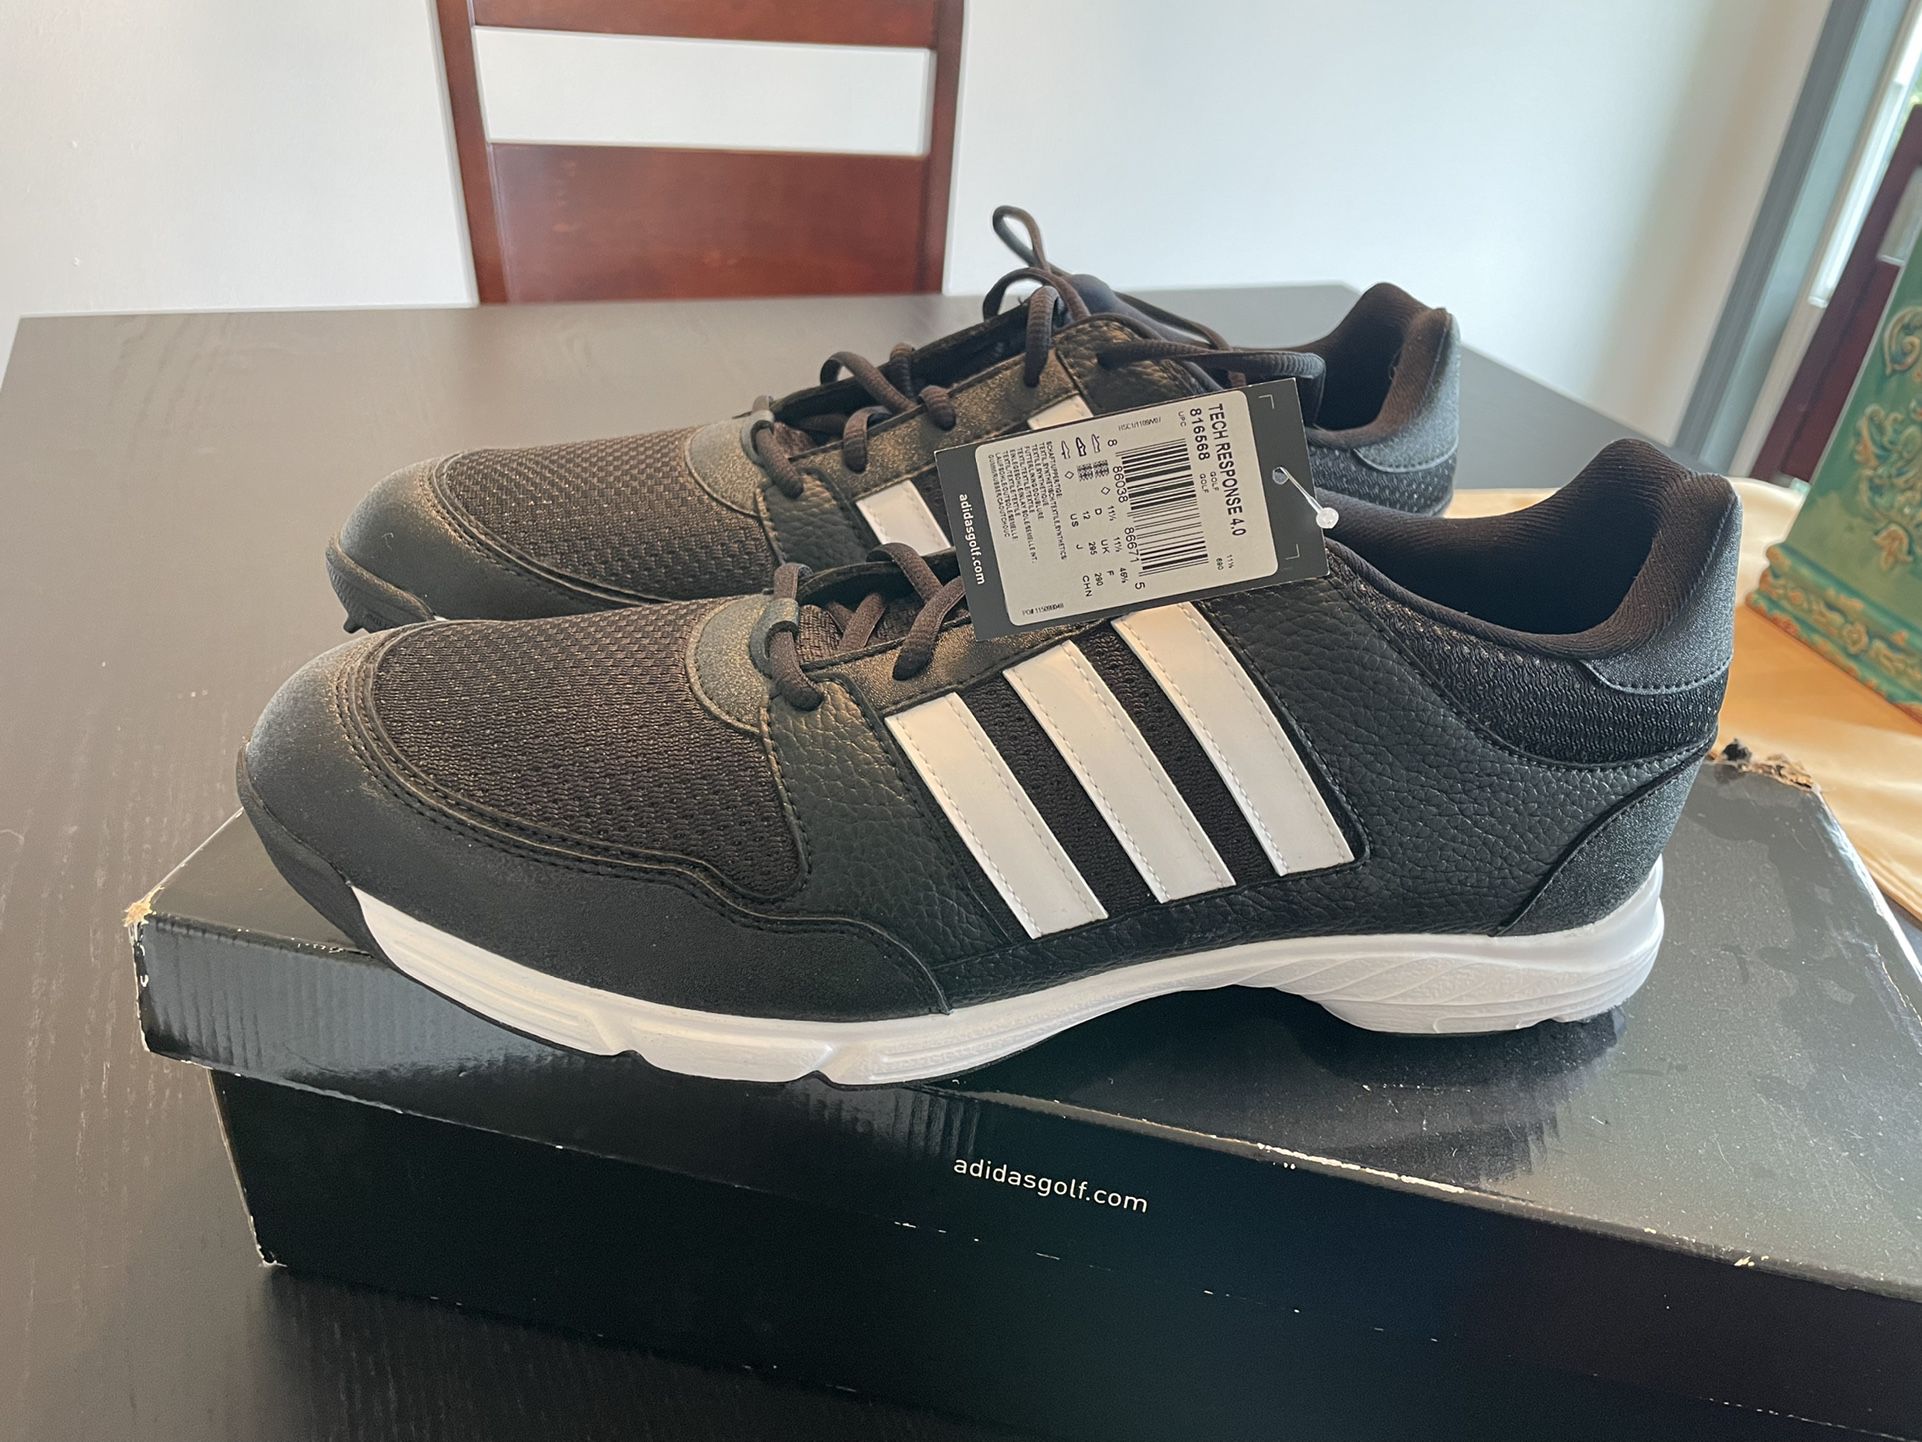 Forladt Uafhængighed skuespillerinde Adidas Golf Shoes Tech Response for Sale in Seattle, WA - OfferUp